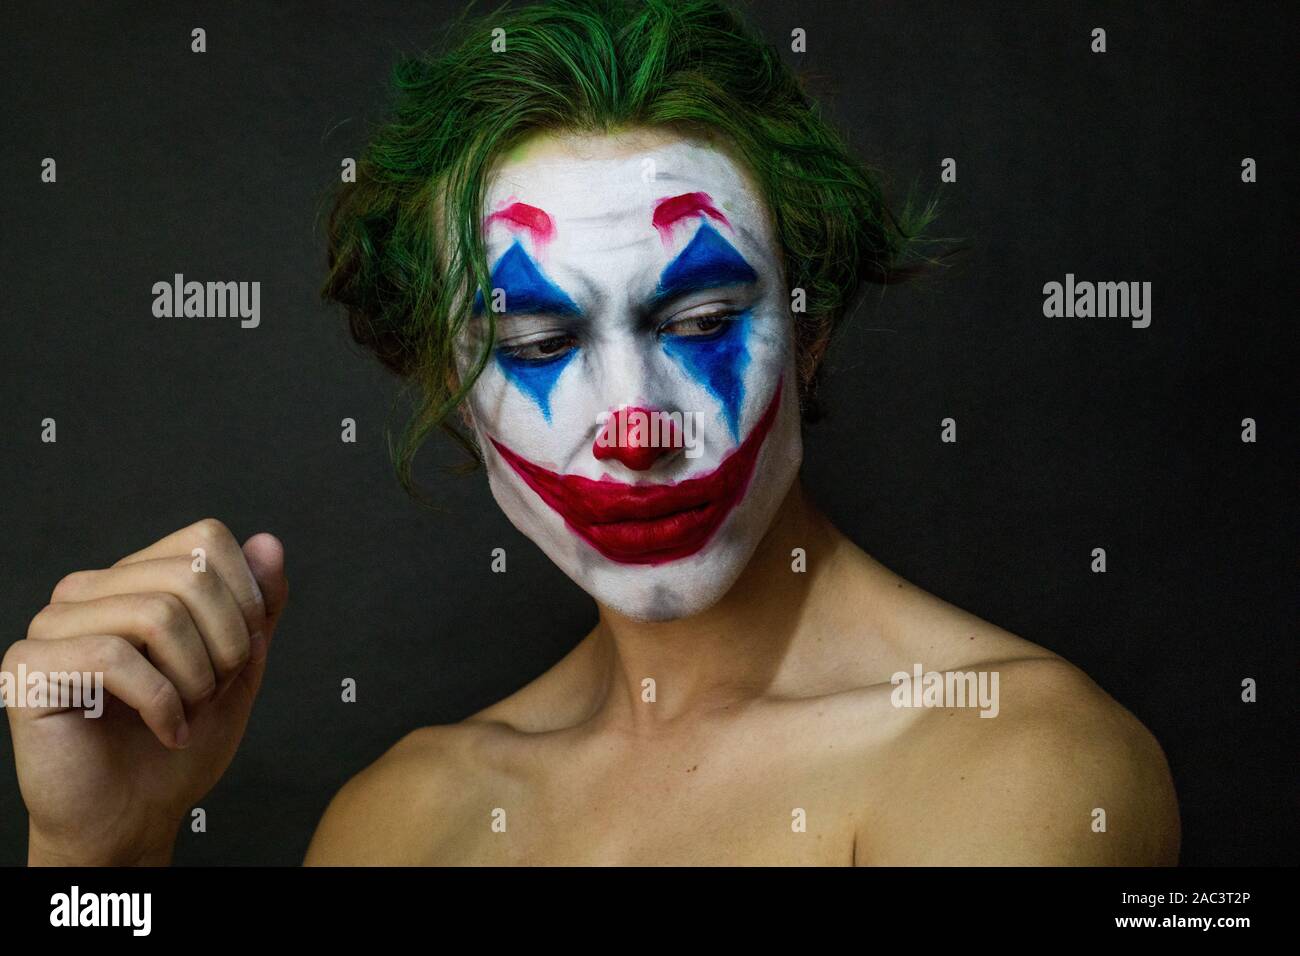 specifikation Penelope nedsænket Portrait of a man with clown makeup and green hair Stock Photo - Alamy